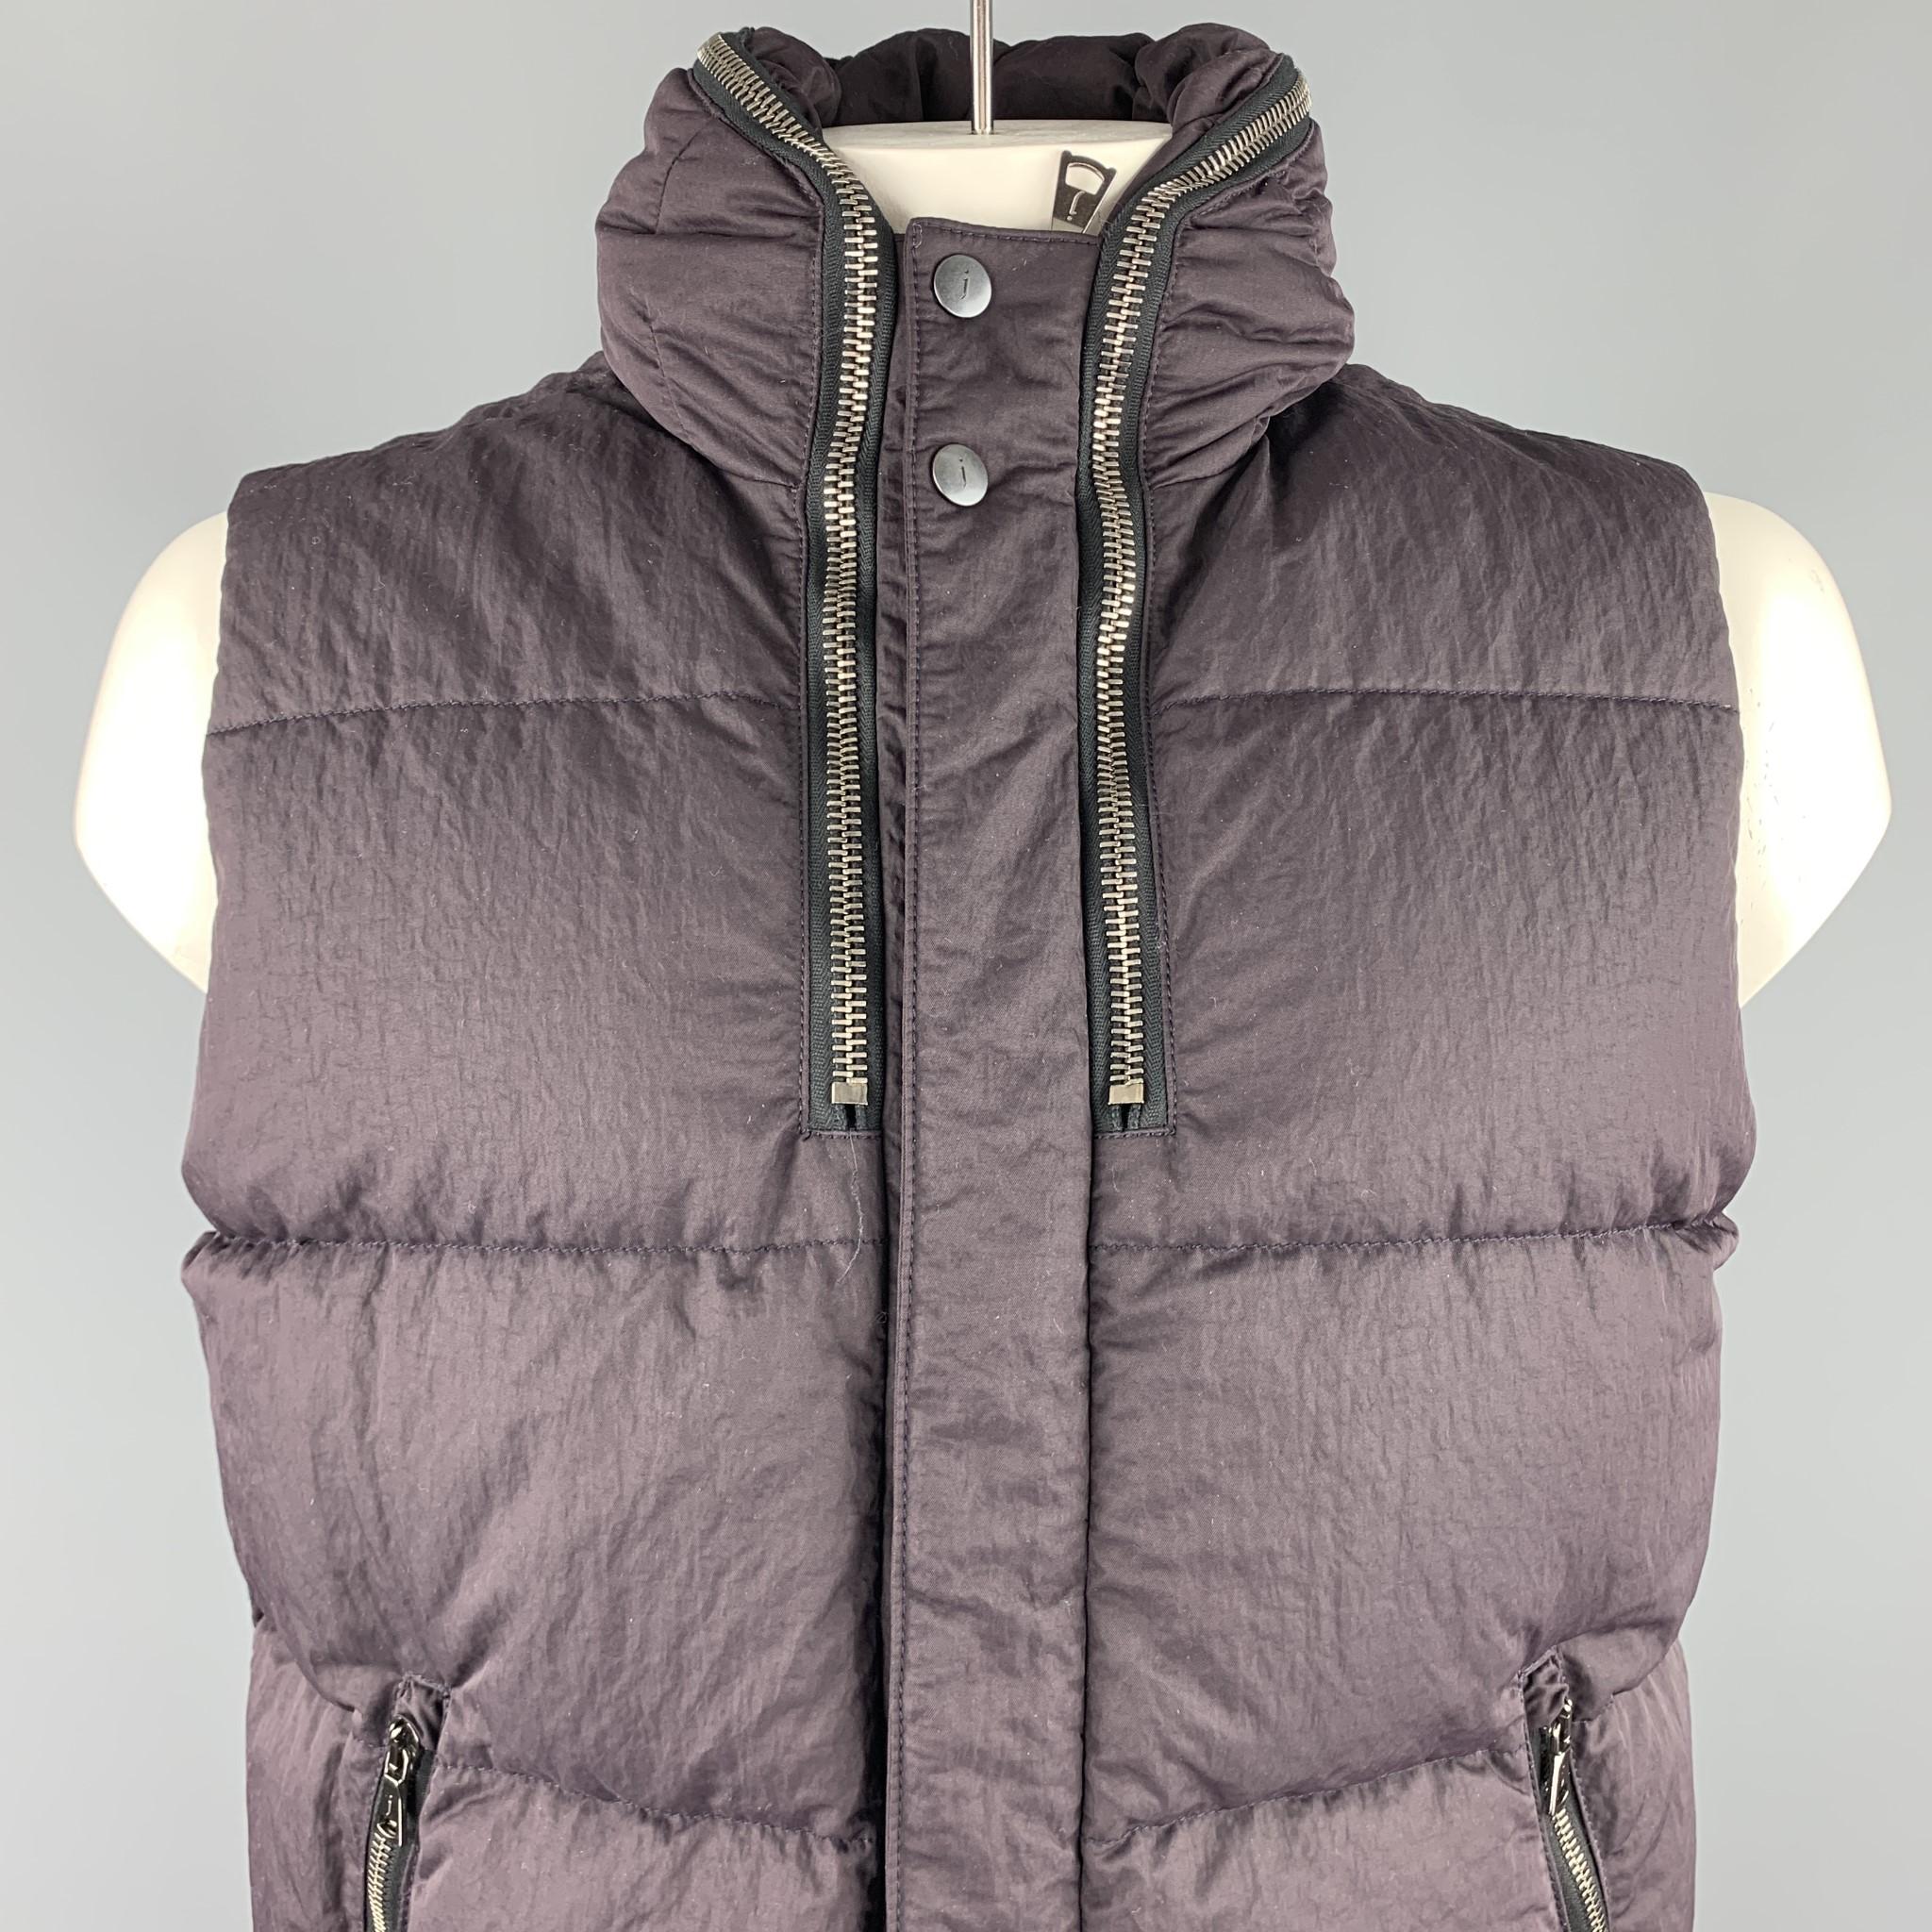 JOHN VARVATOS vest comes in a eggplant quilted polyamide featuring a zipper hooded design, zipper pockets, and a zip & snap button closure.

New With Tags.
Marked: 54

Measurements:

Shoulder: 17 in. 
Chest: 46 in. 
Length: 26.5 in. 